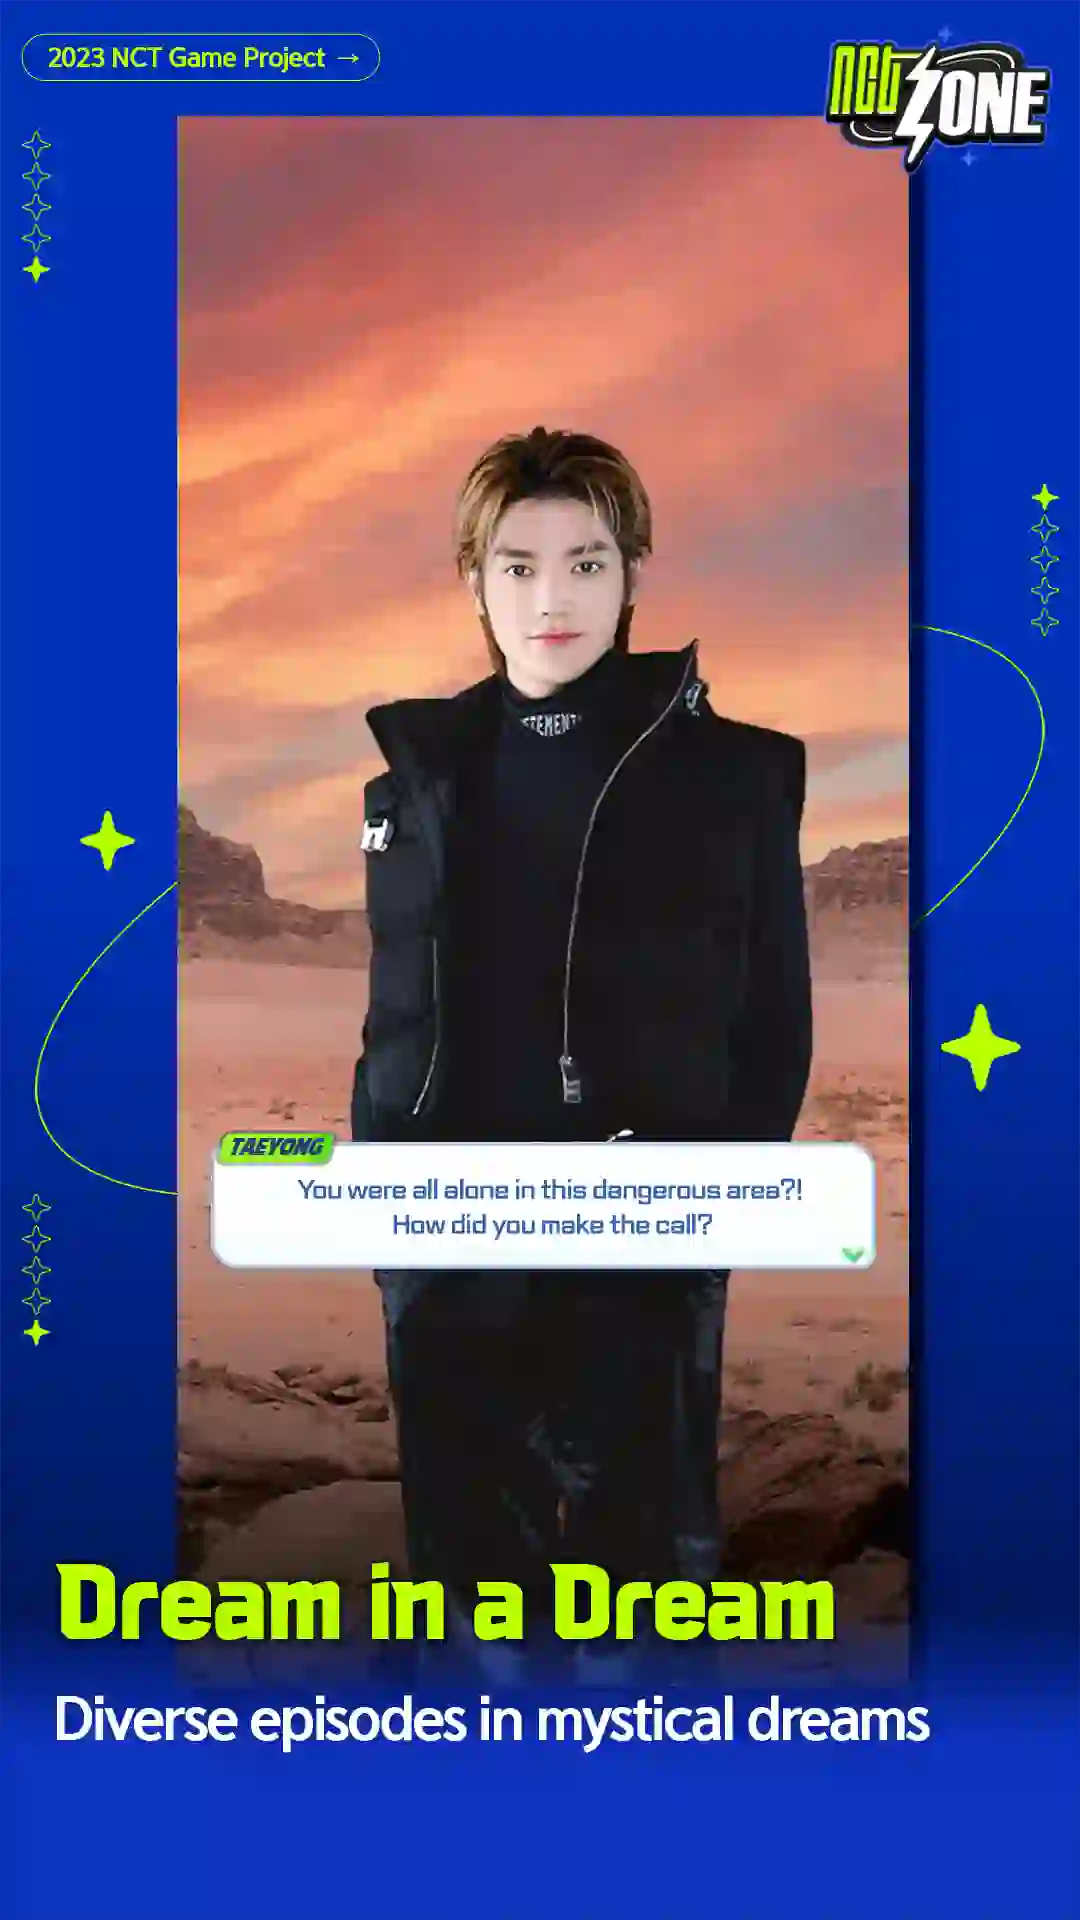 Features of NCT Zone APK